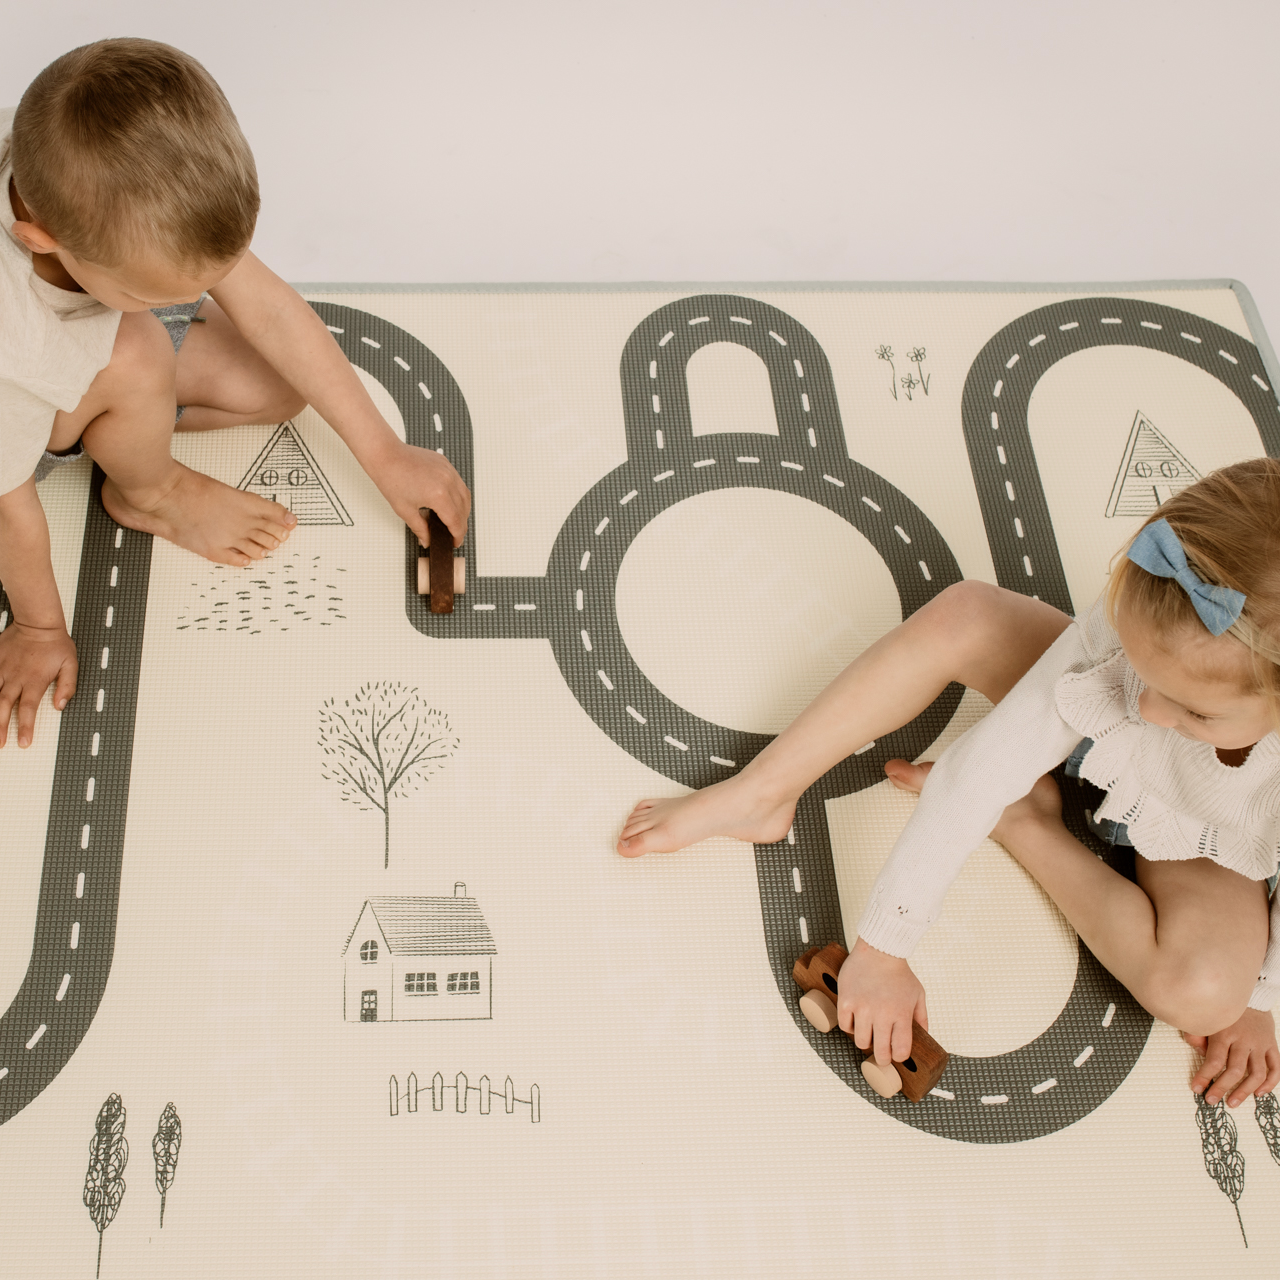 Car Track/ Grey Speckled Play Mat